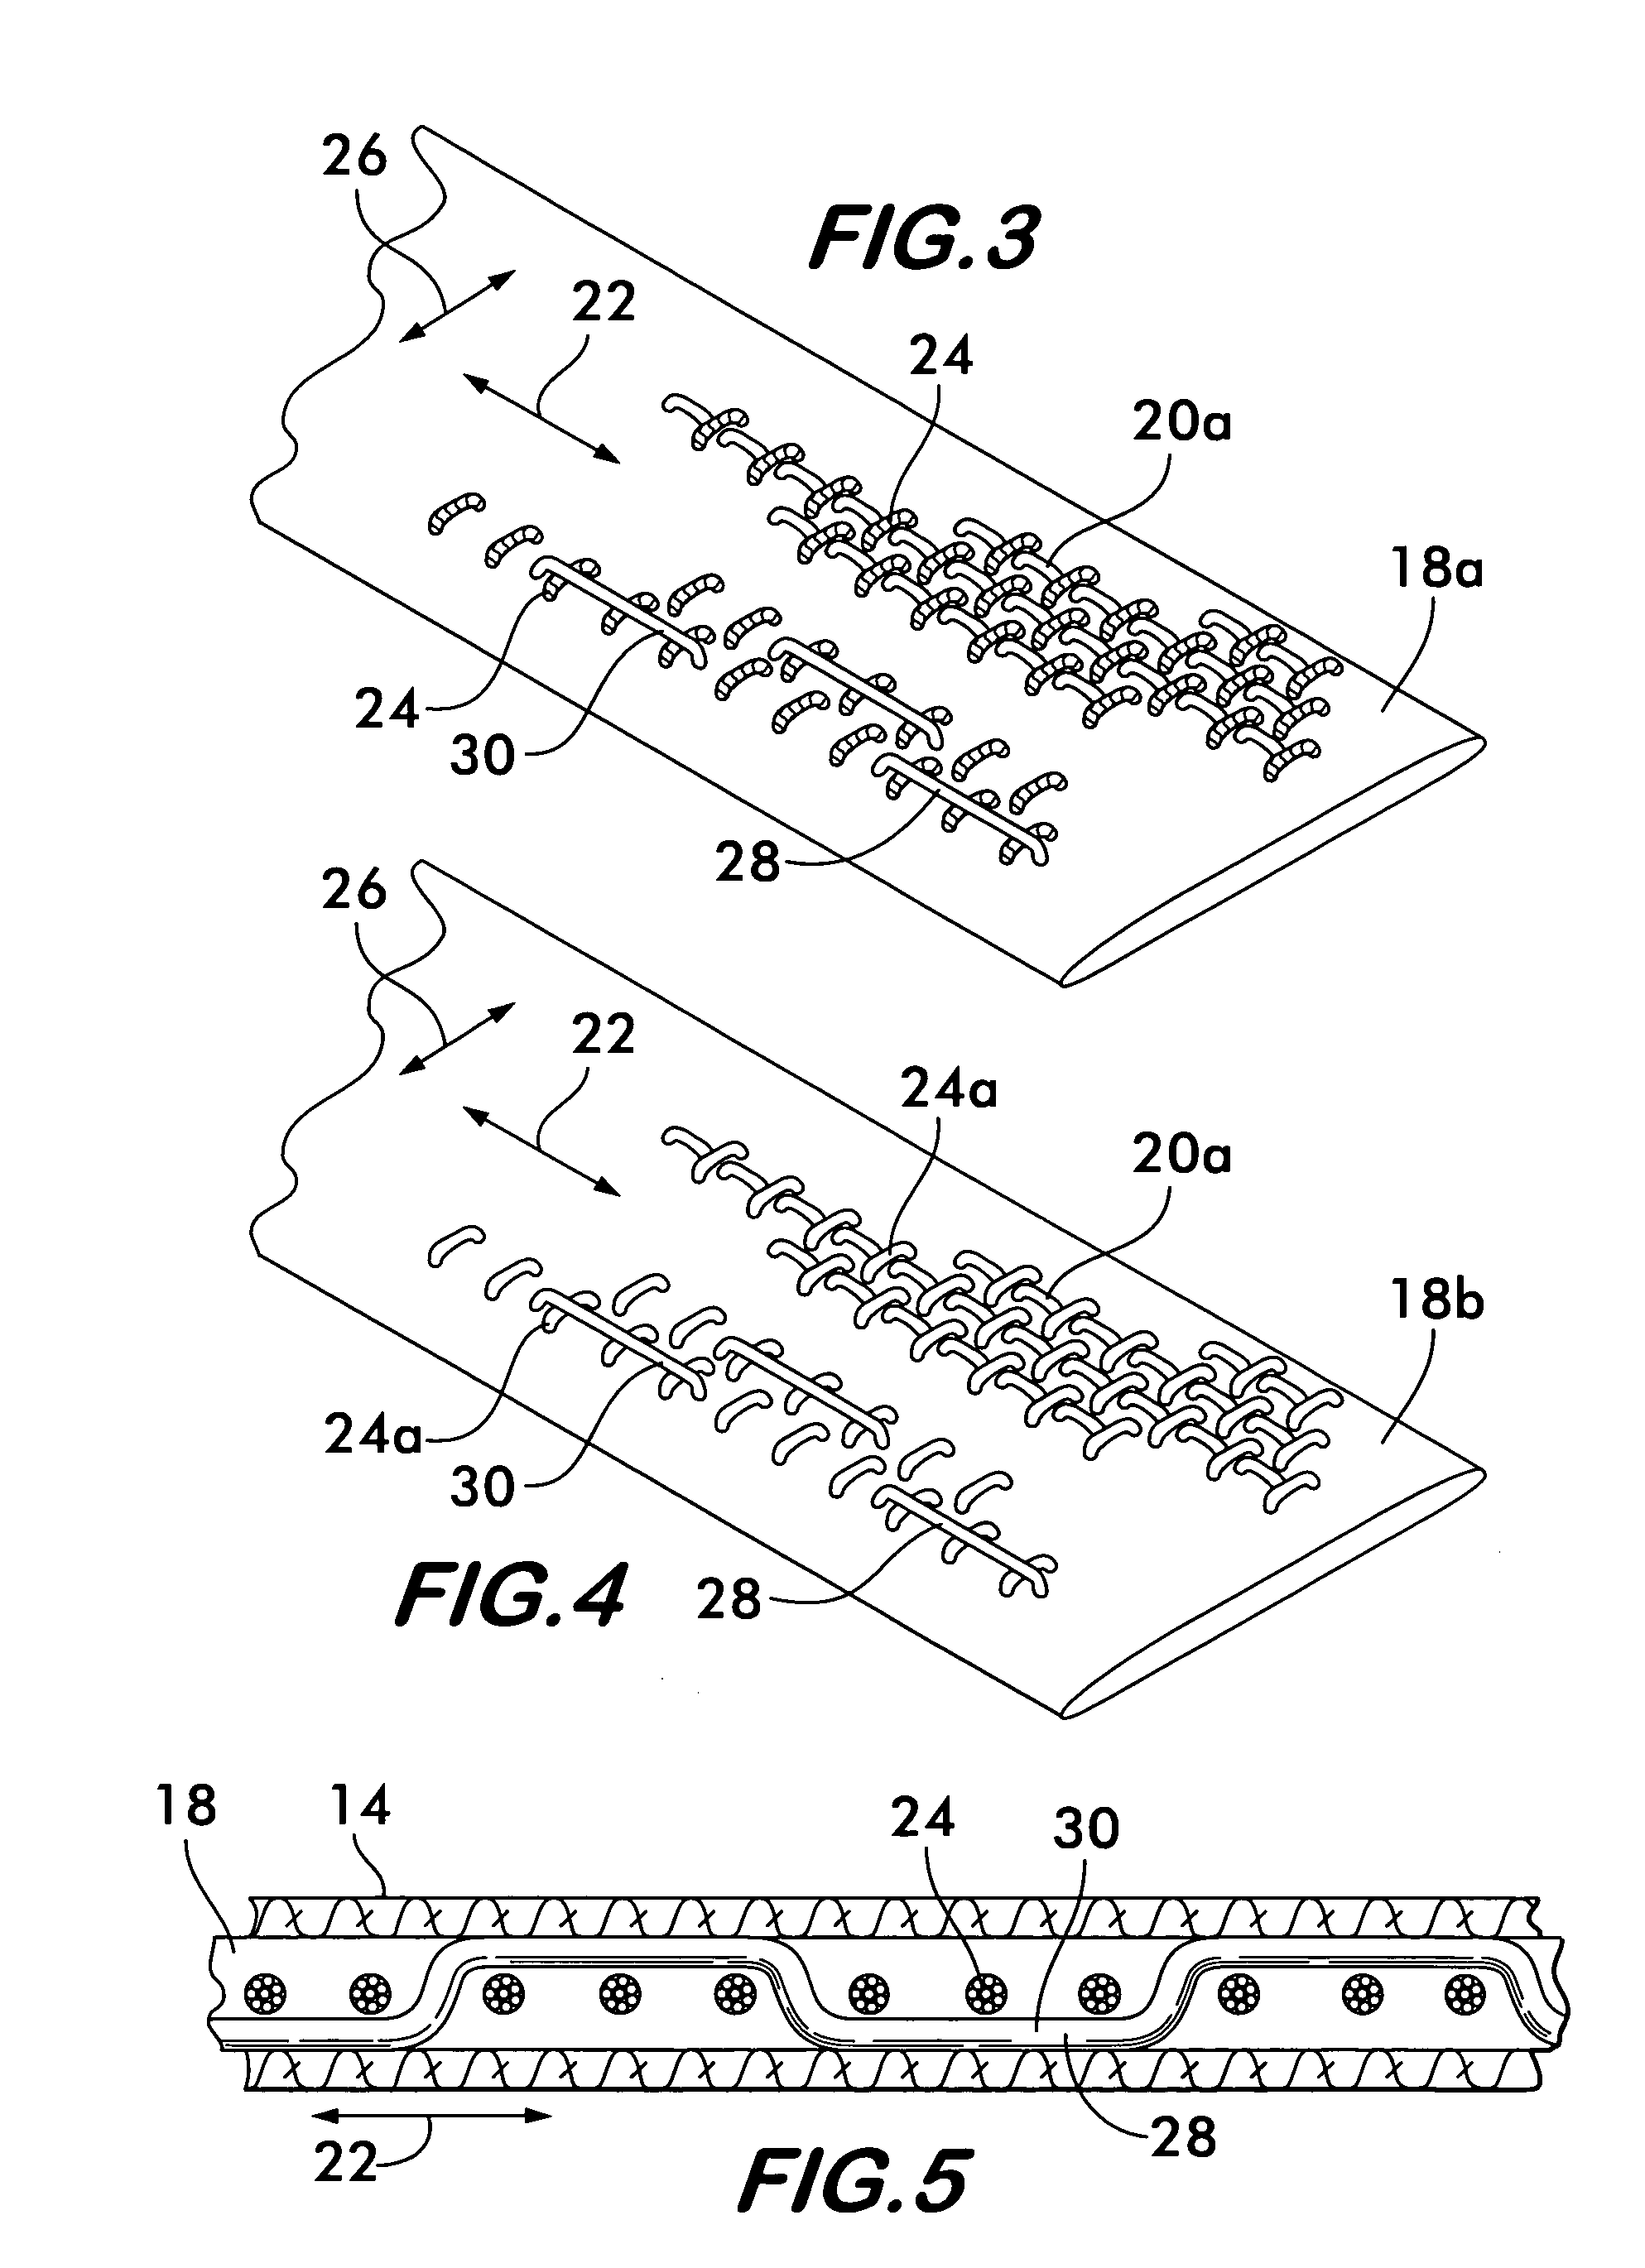 Low-friction pull tape